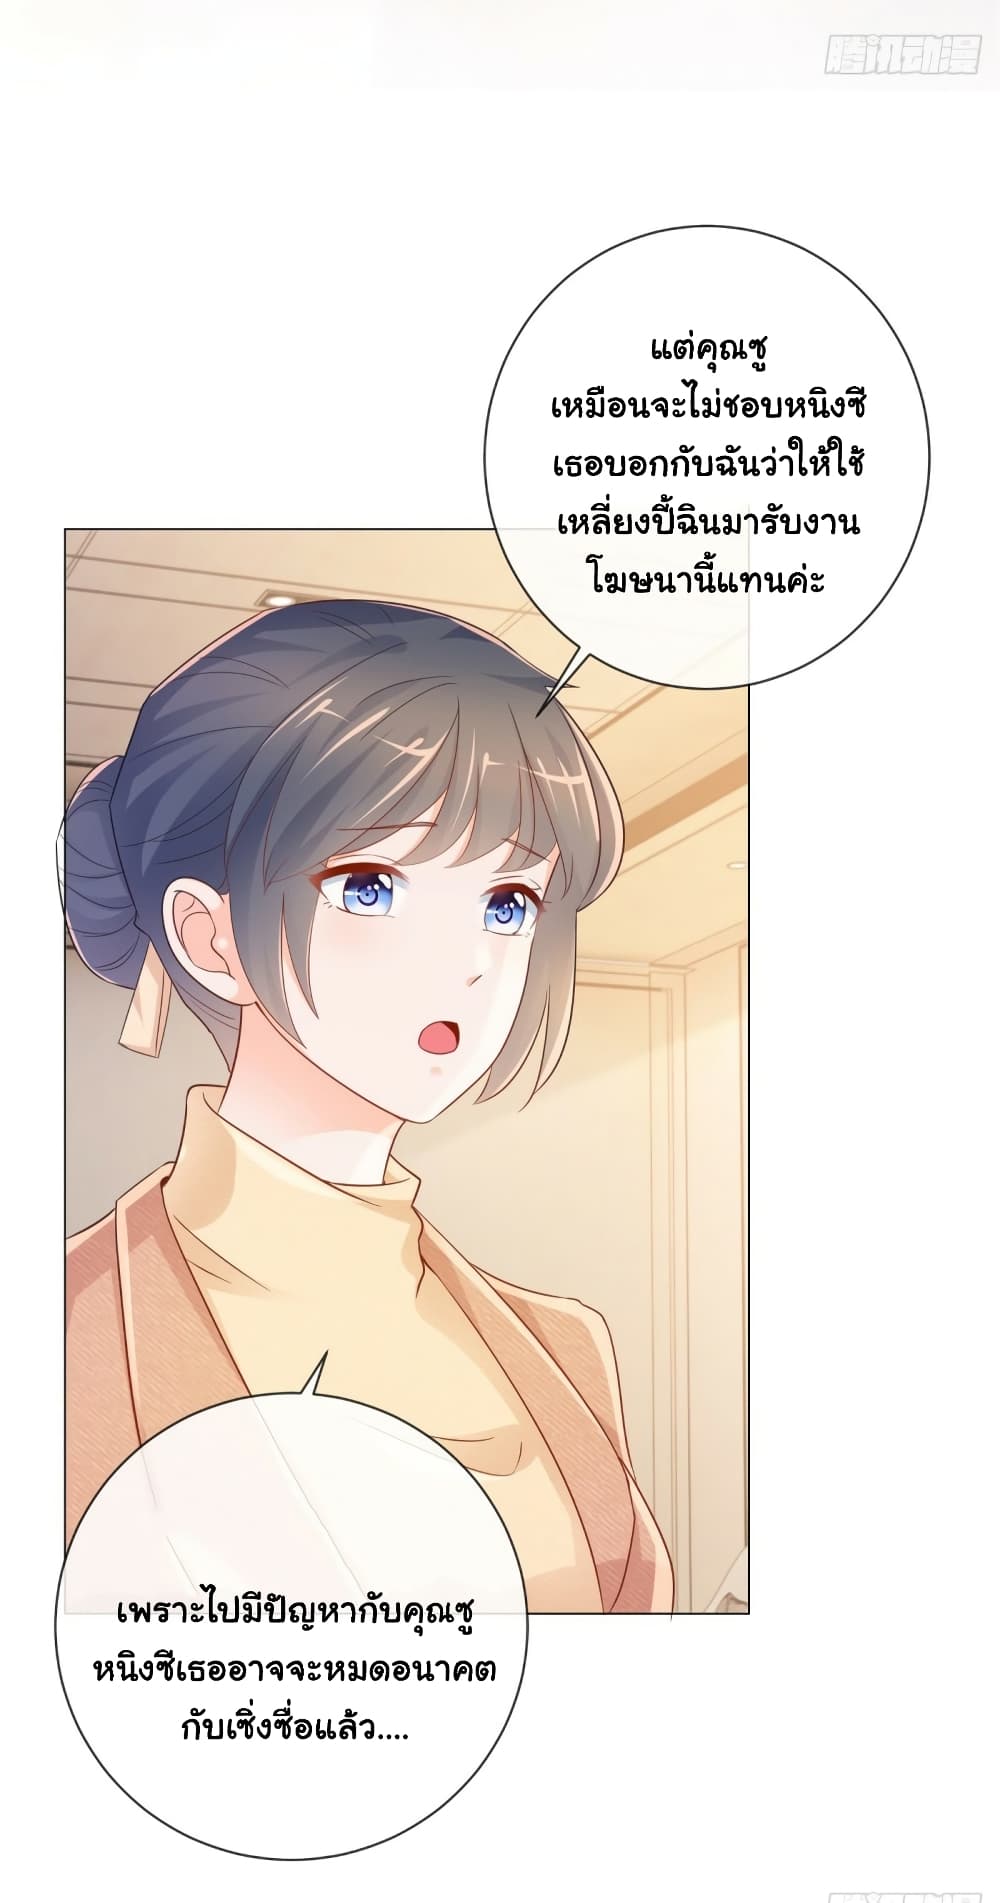 The Lovely Wife And Strange Marriage à¹à¸œà¸™à¸£à¸±à¸à¸¥à¸§à¸‡à¹ƒà¸ˆ 322 (20)